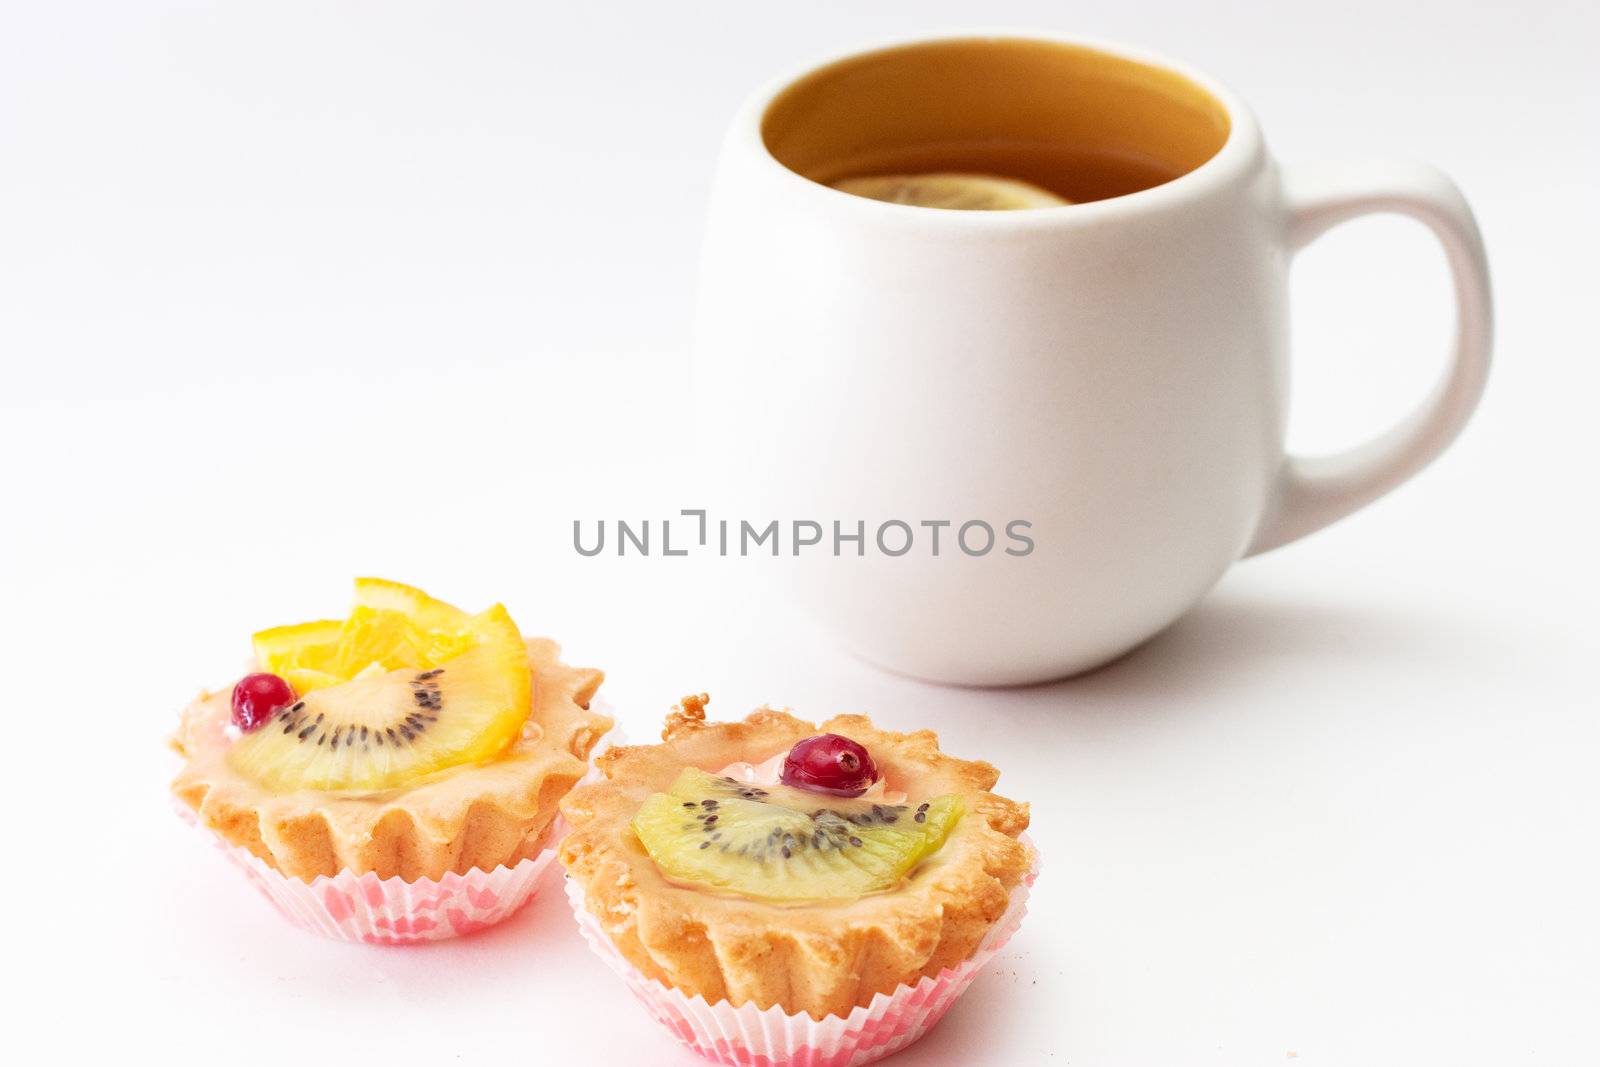 A couple of tartlets and a cup of tea with lemon